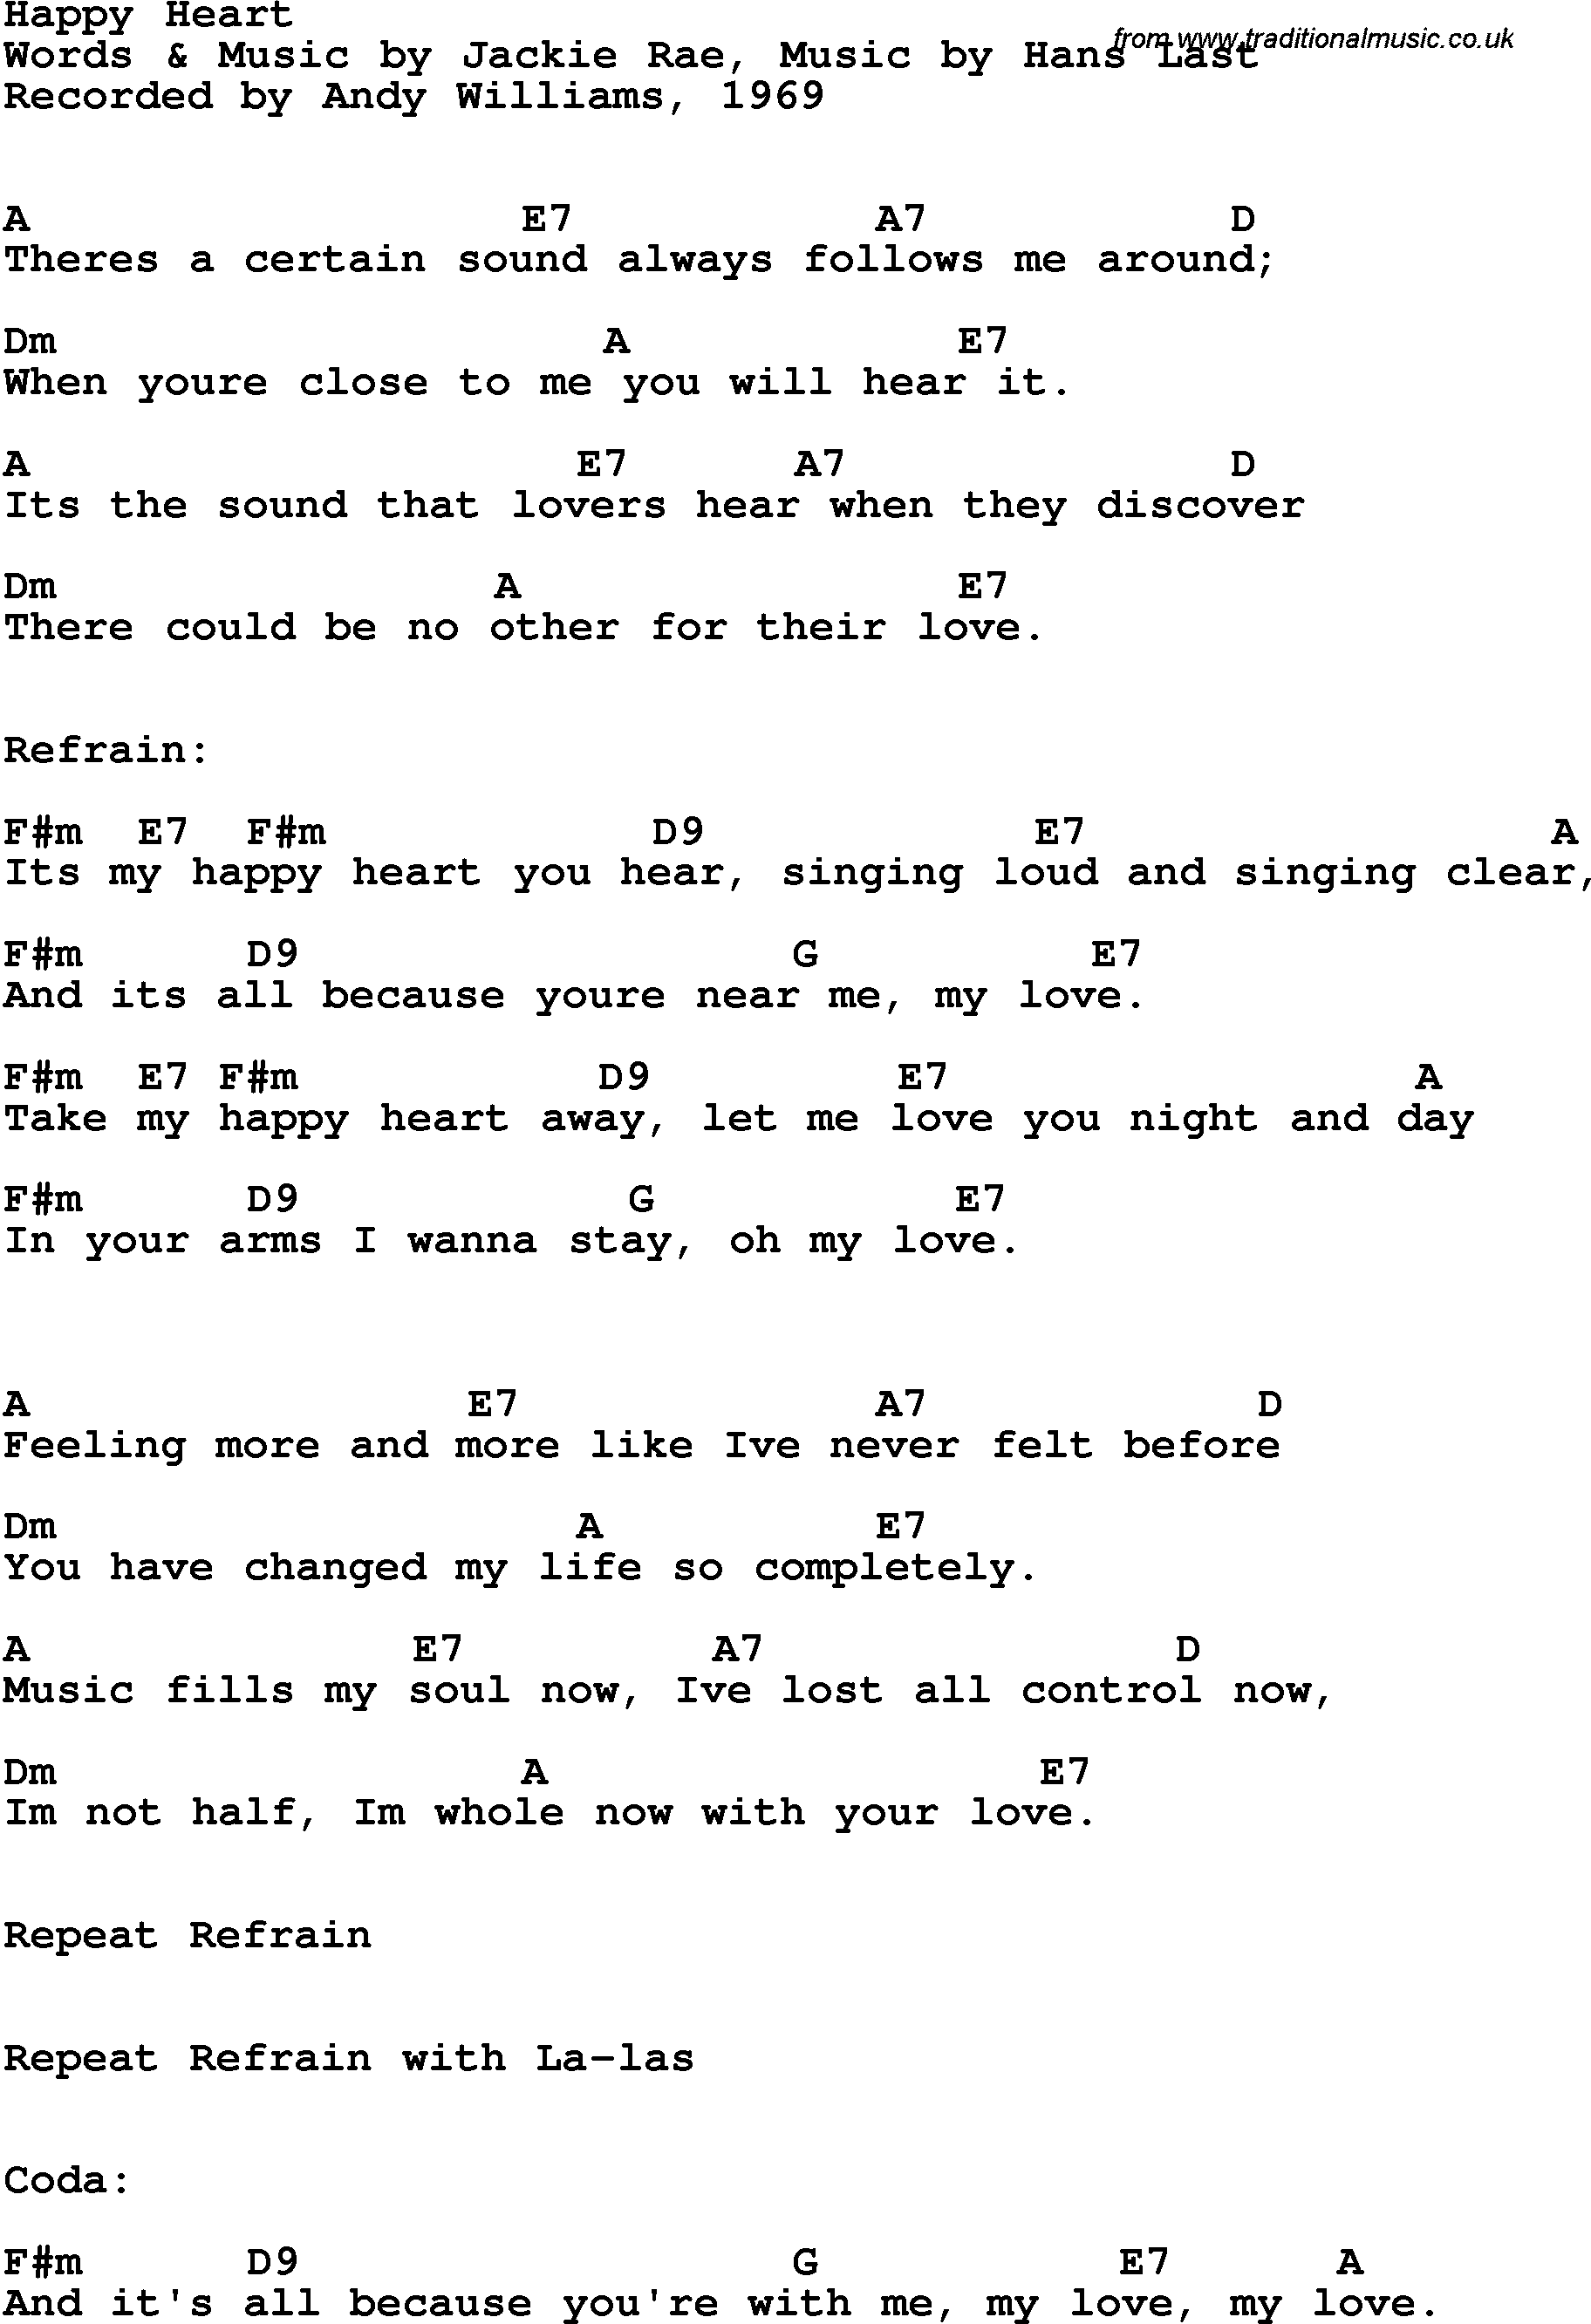 Song Lyrics with guitar chords for Happy Heart - Andy Williams, 1969